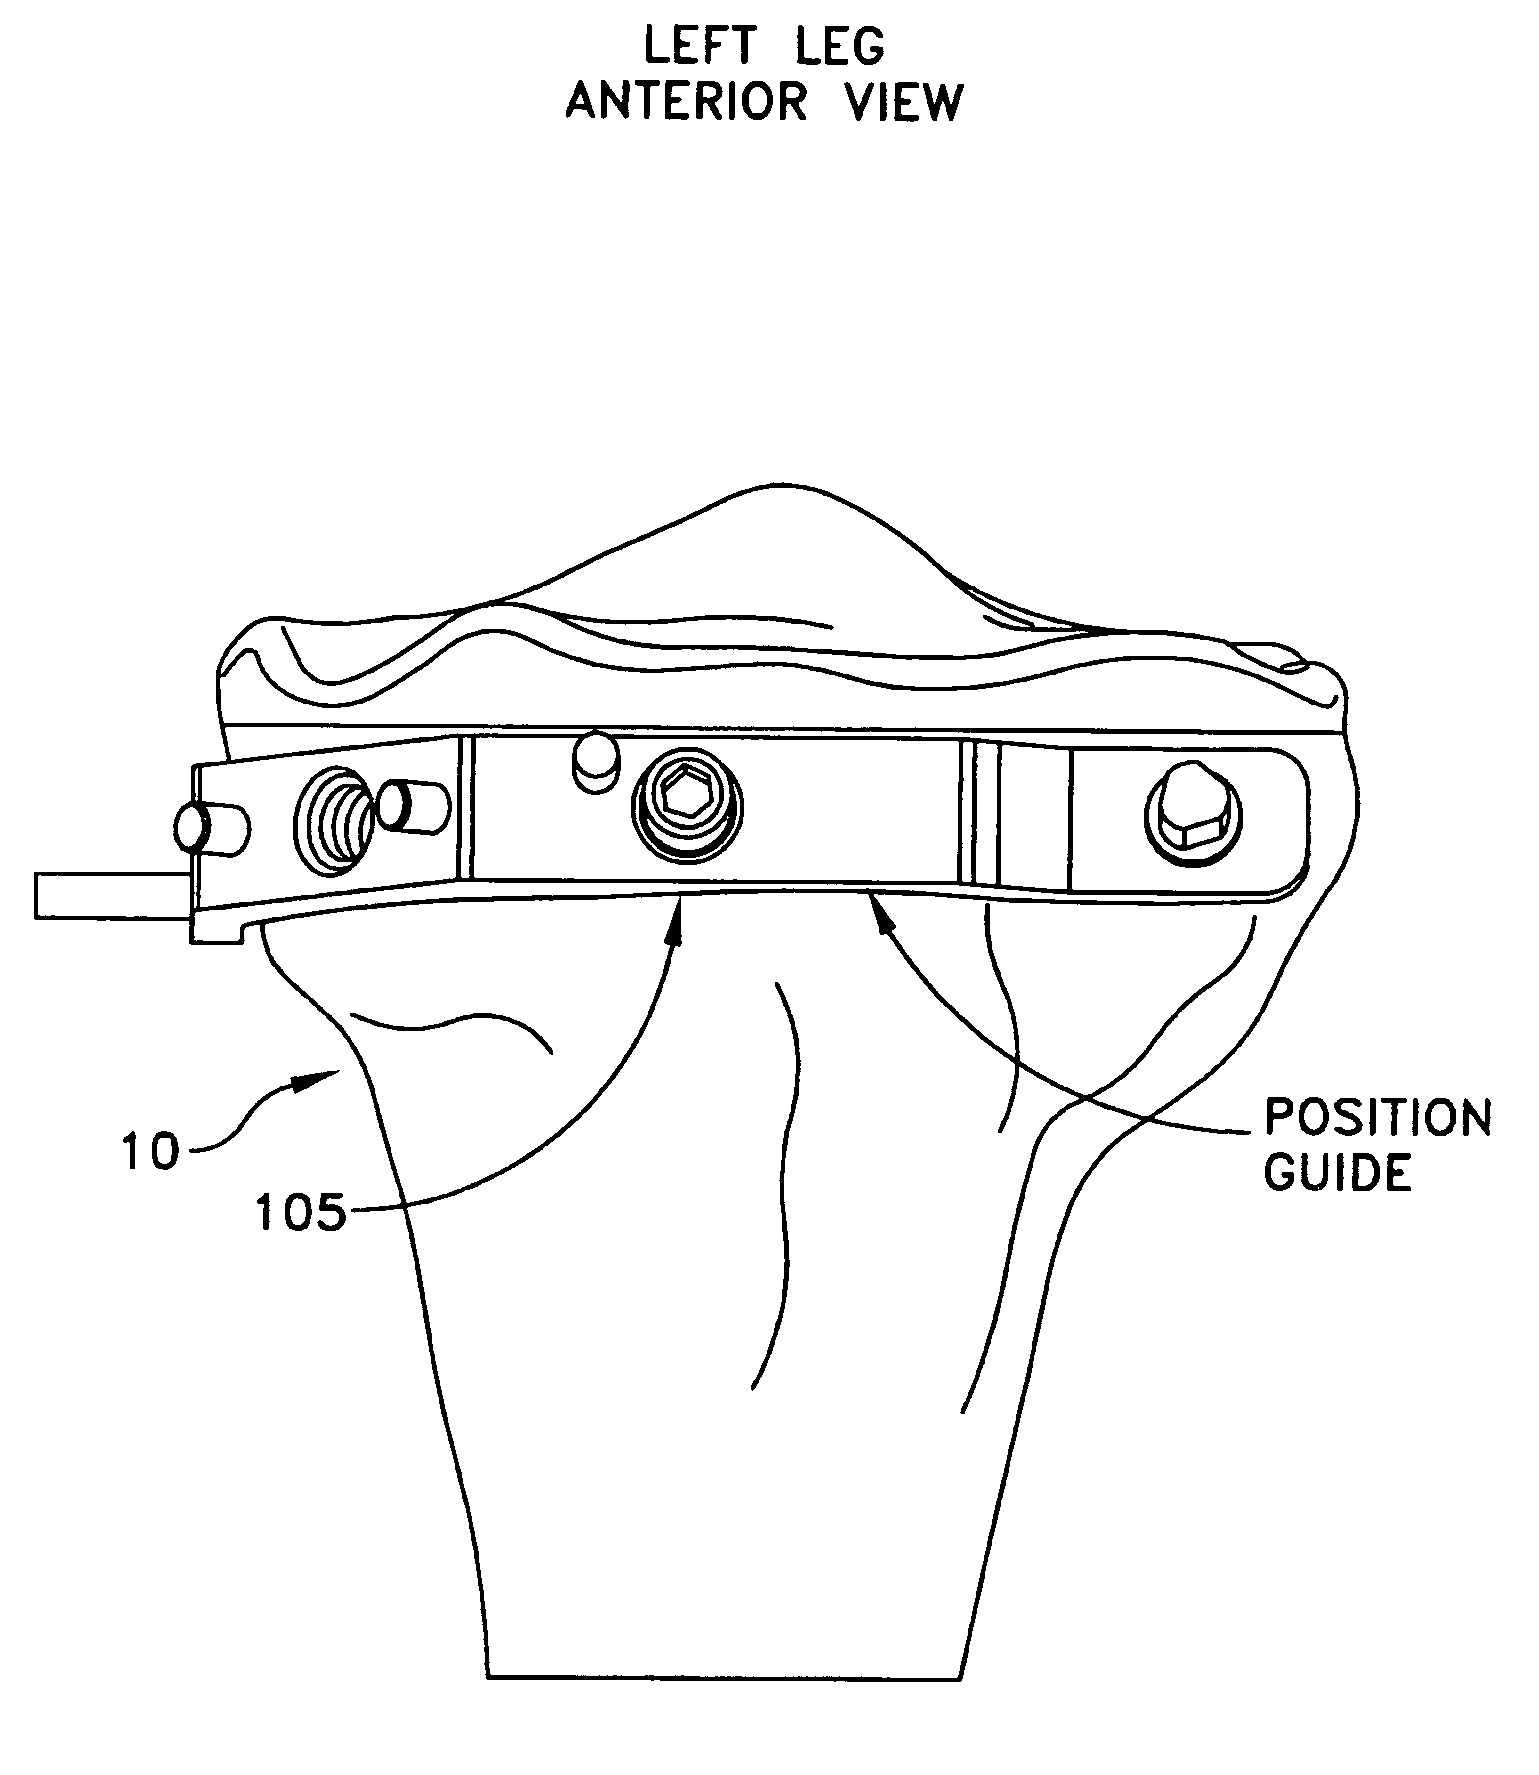 Method and apparatus for forming a wedge-like opening in a bone for an open wedge osteotomy